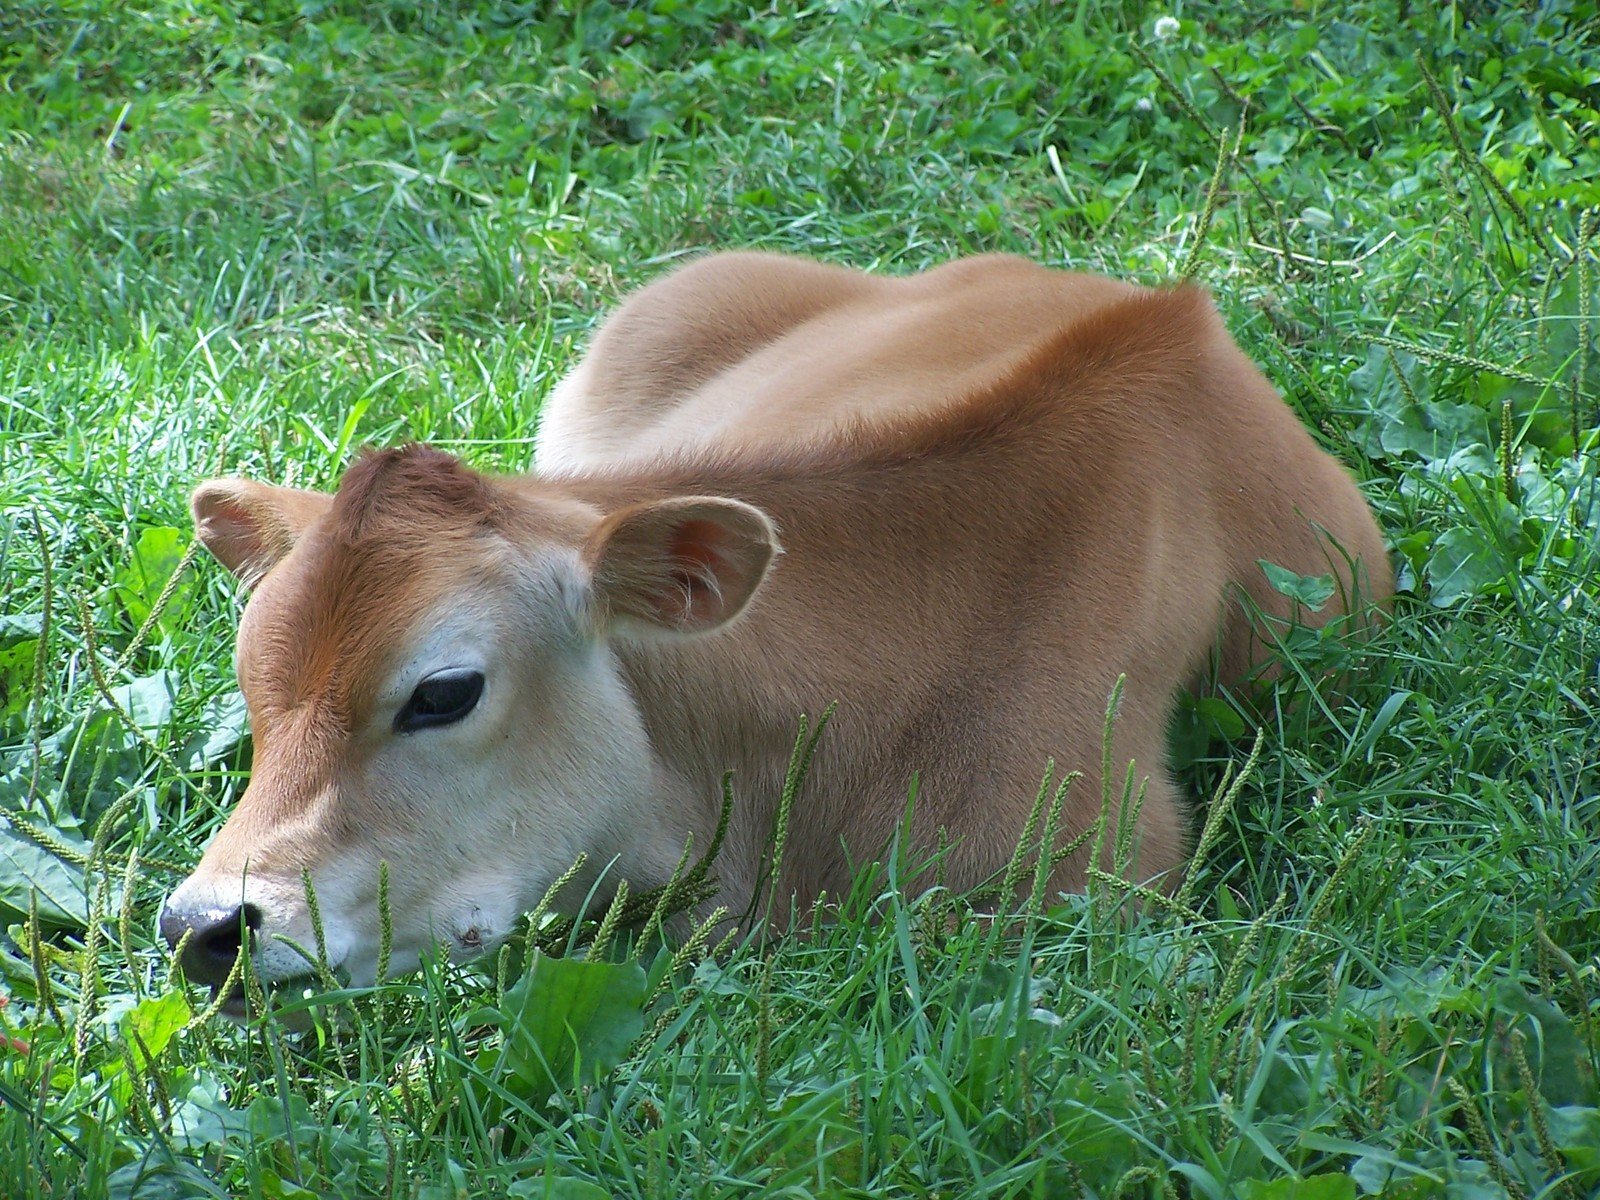 a cow laying in the grass outside by itself